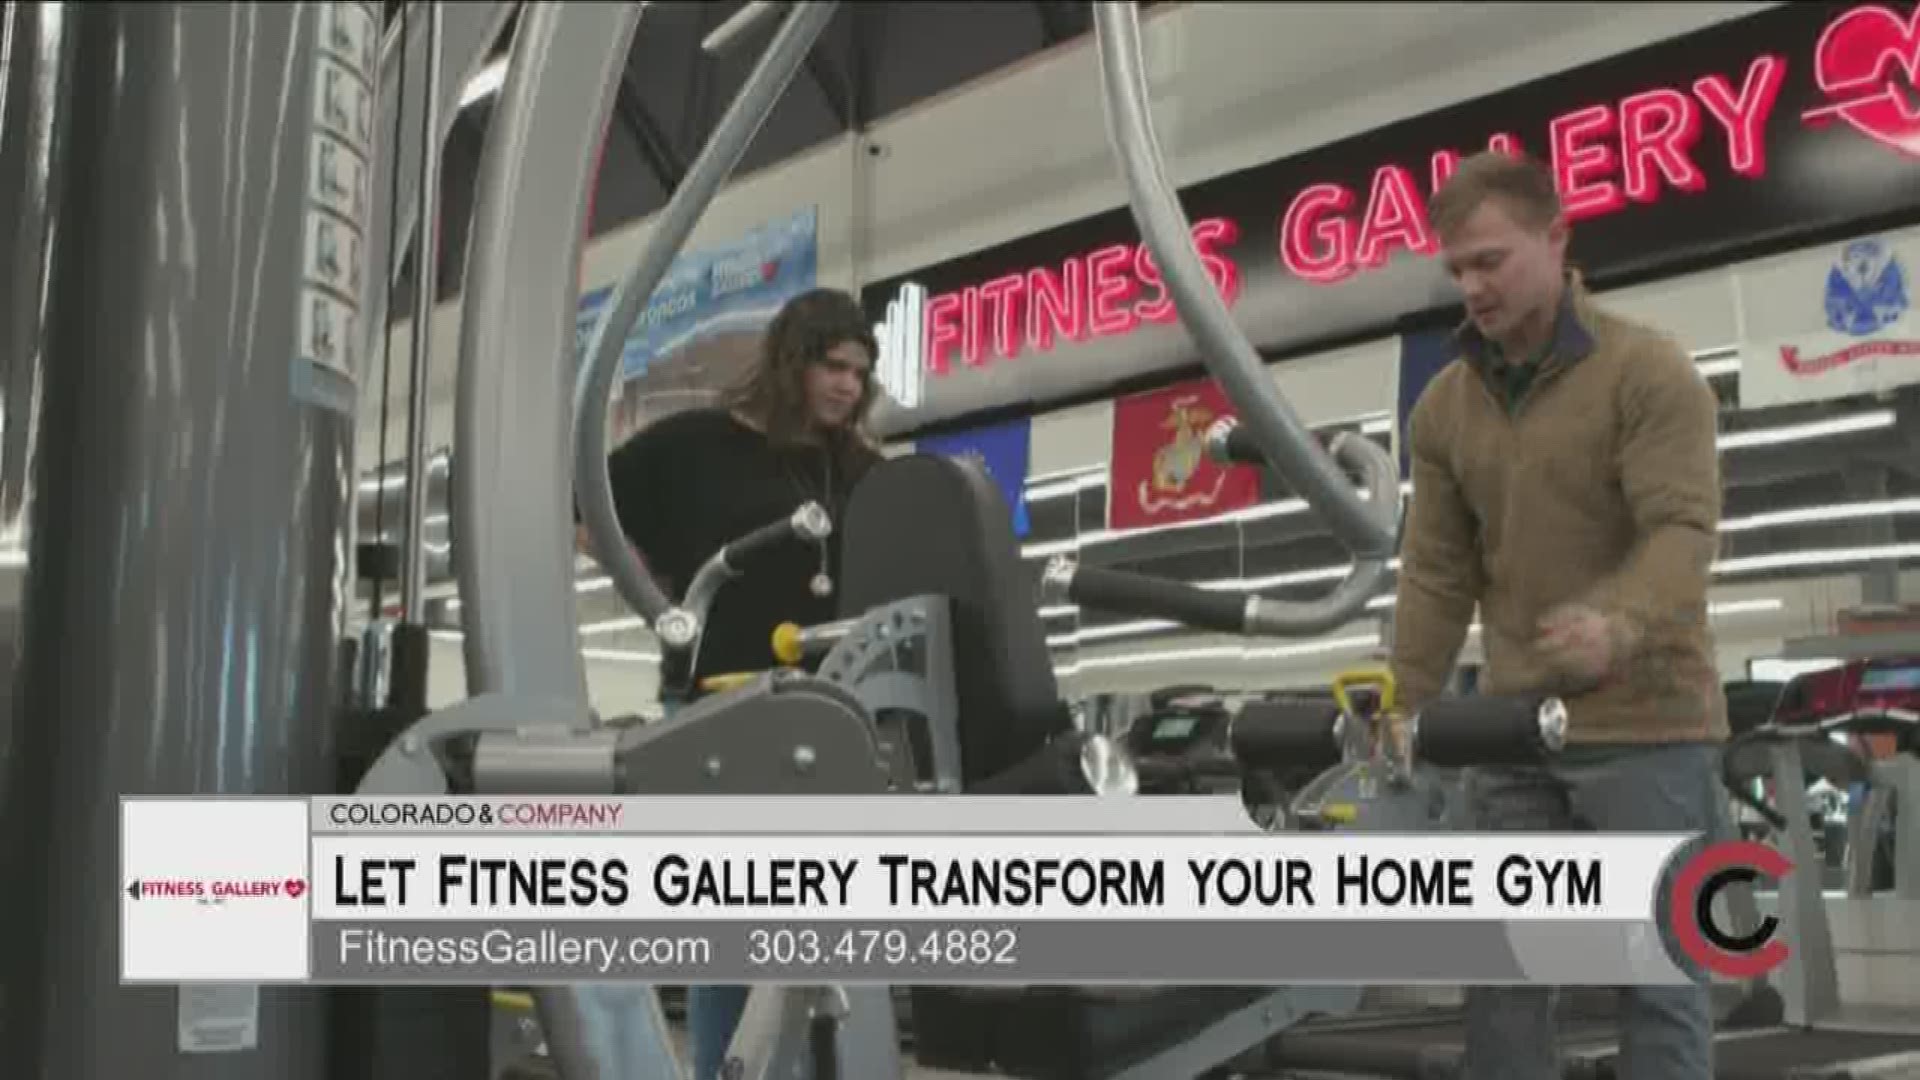 Call 303.479.4882 or visit FitnessGallery.com. They are your home for home gym products that are built to last.